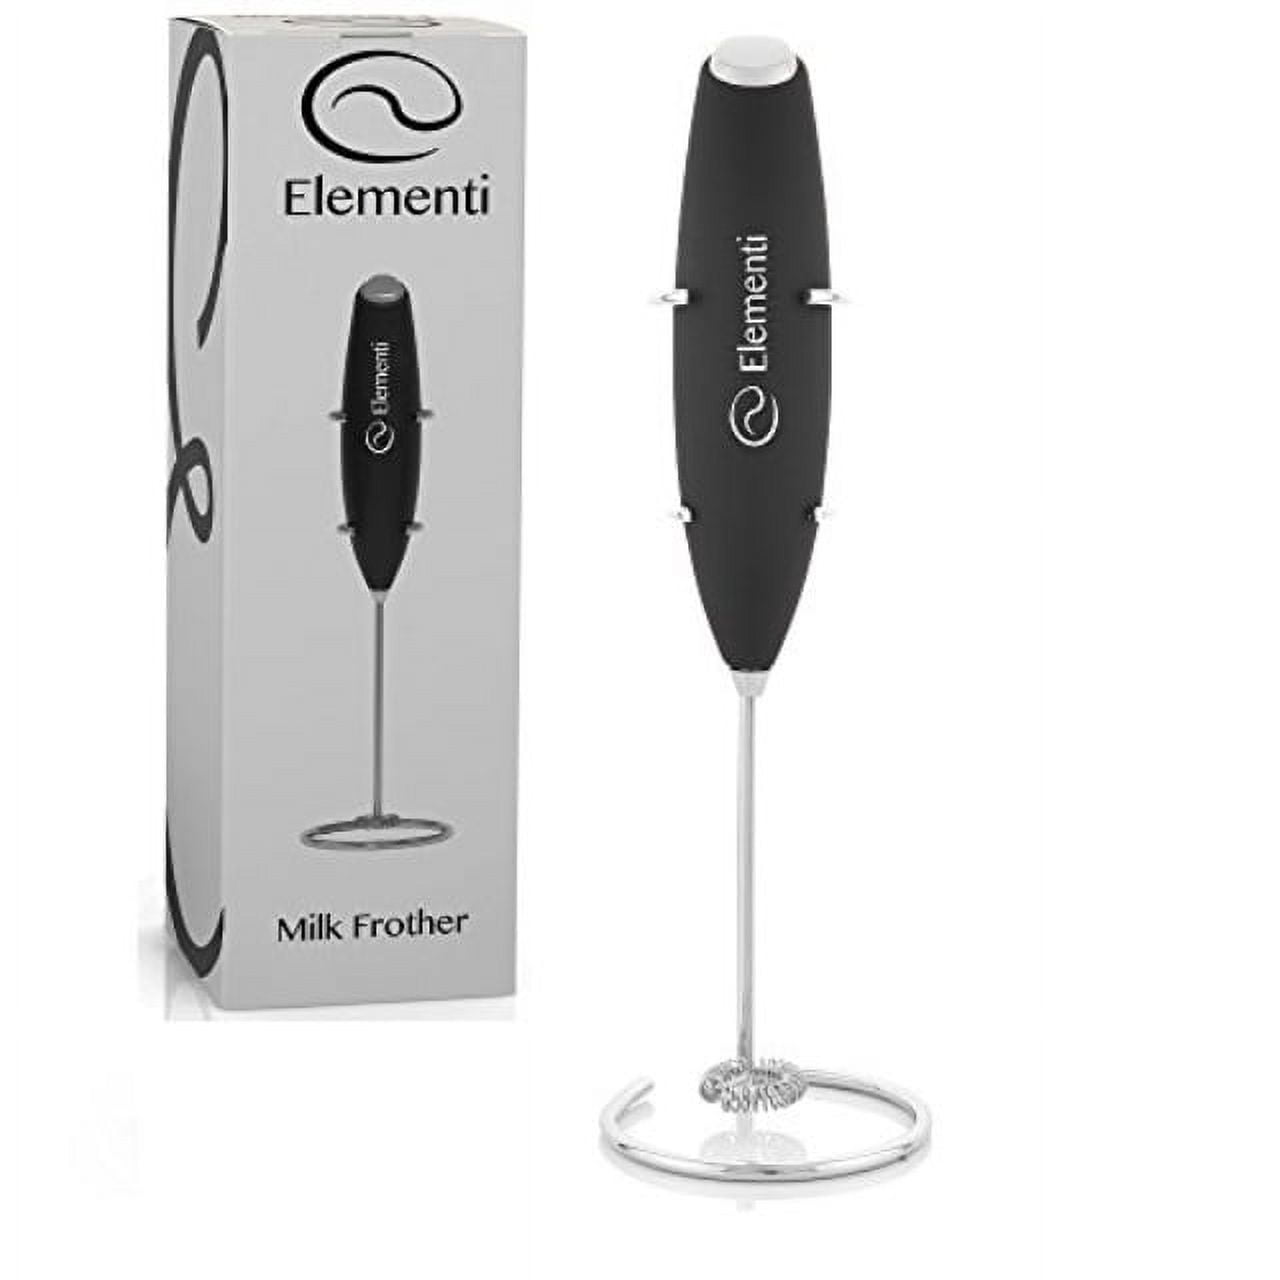 Elementi Milk Frother Handheld Electric Matcha Whisk Review 